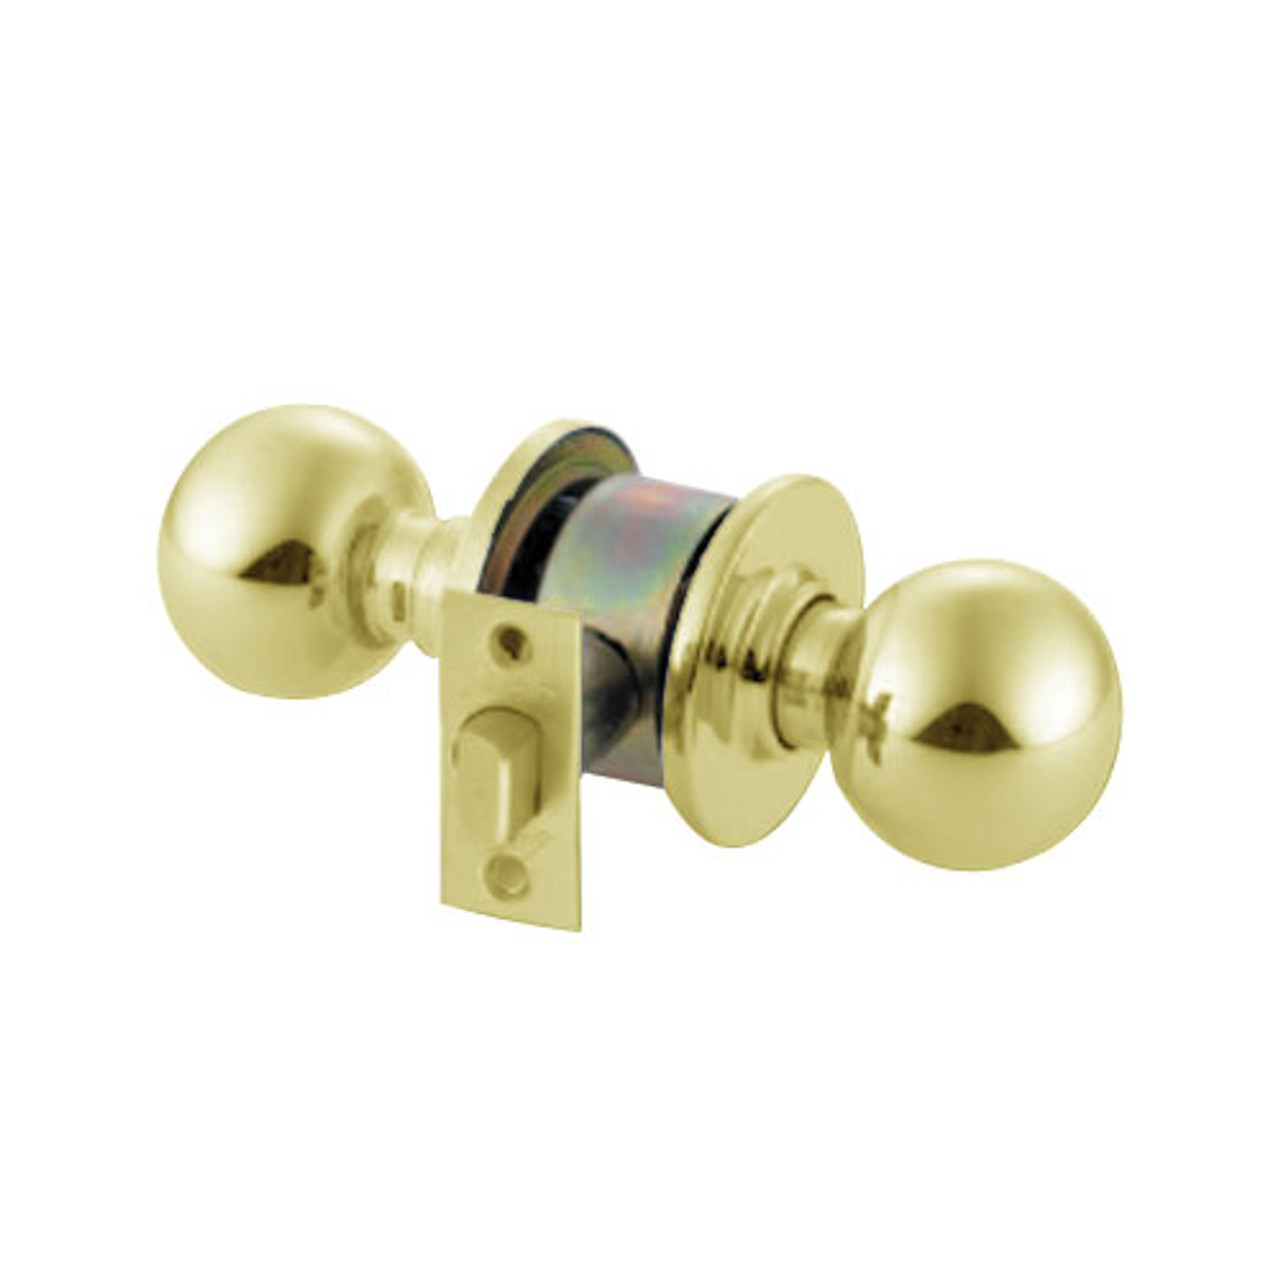 MK01-BD-03 Arrow Lock MK Series Non Keyed Cylindrical Locksets for Passage with BD Knob in Bright Brass Finish